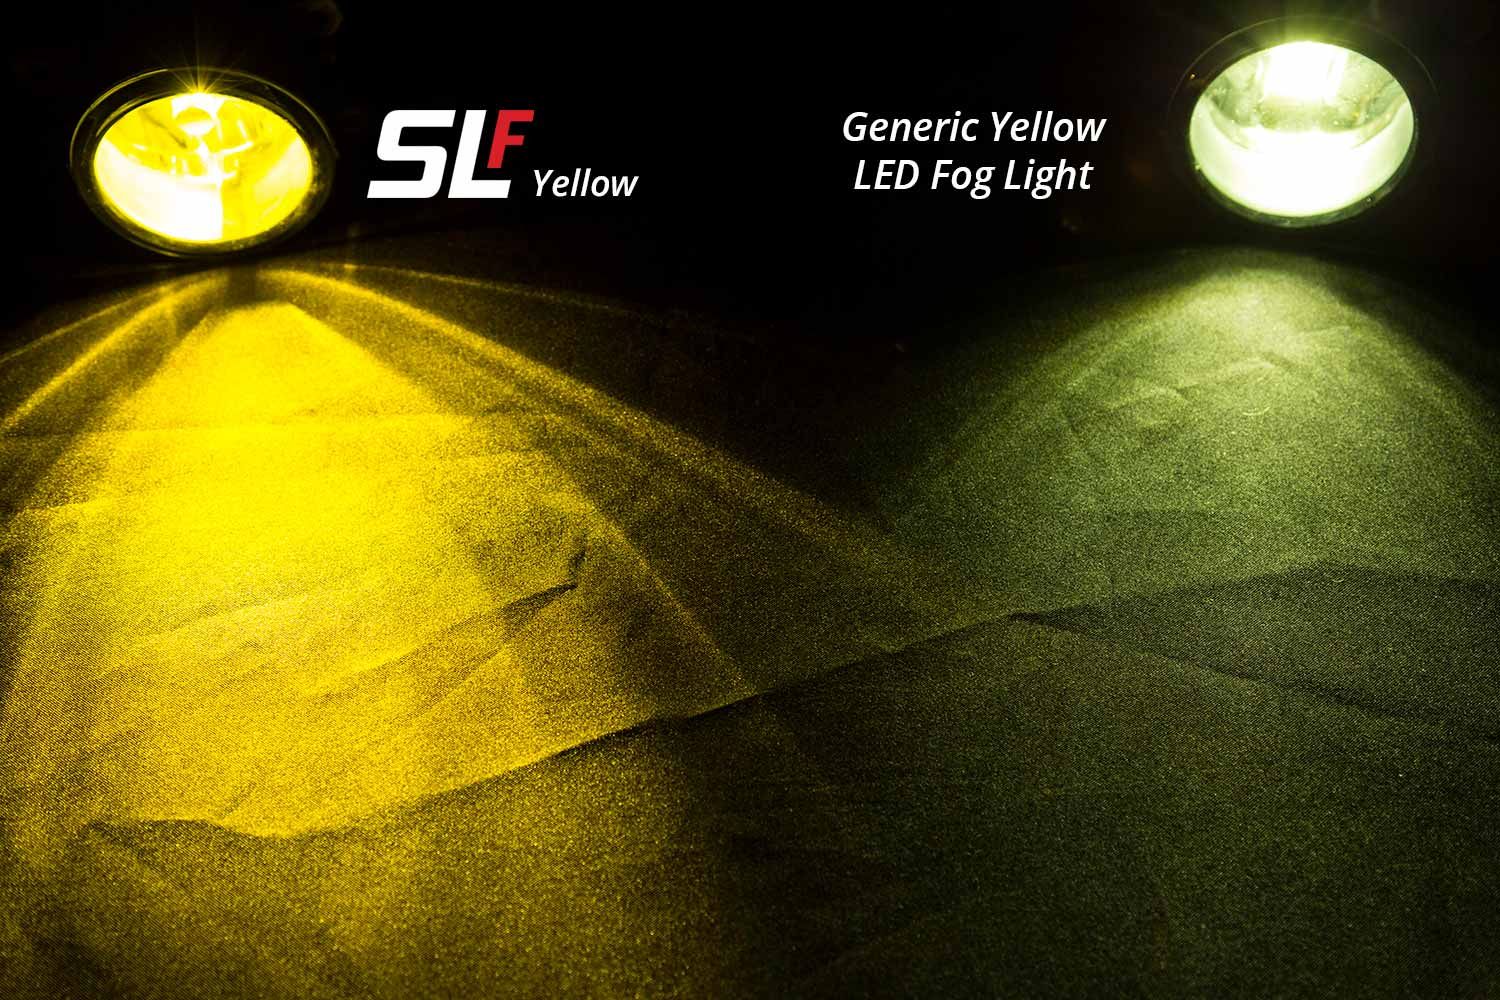 Why do yellow LEDs look green?